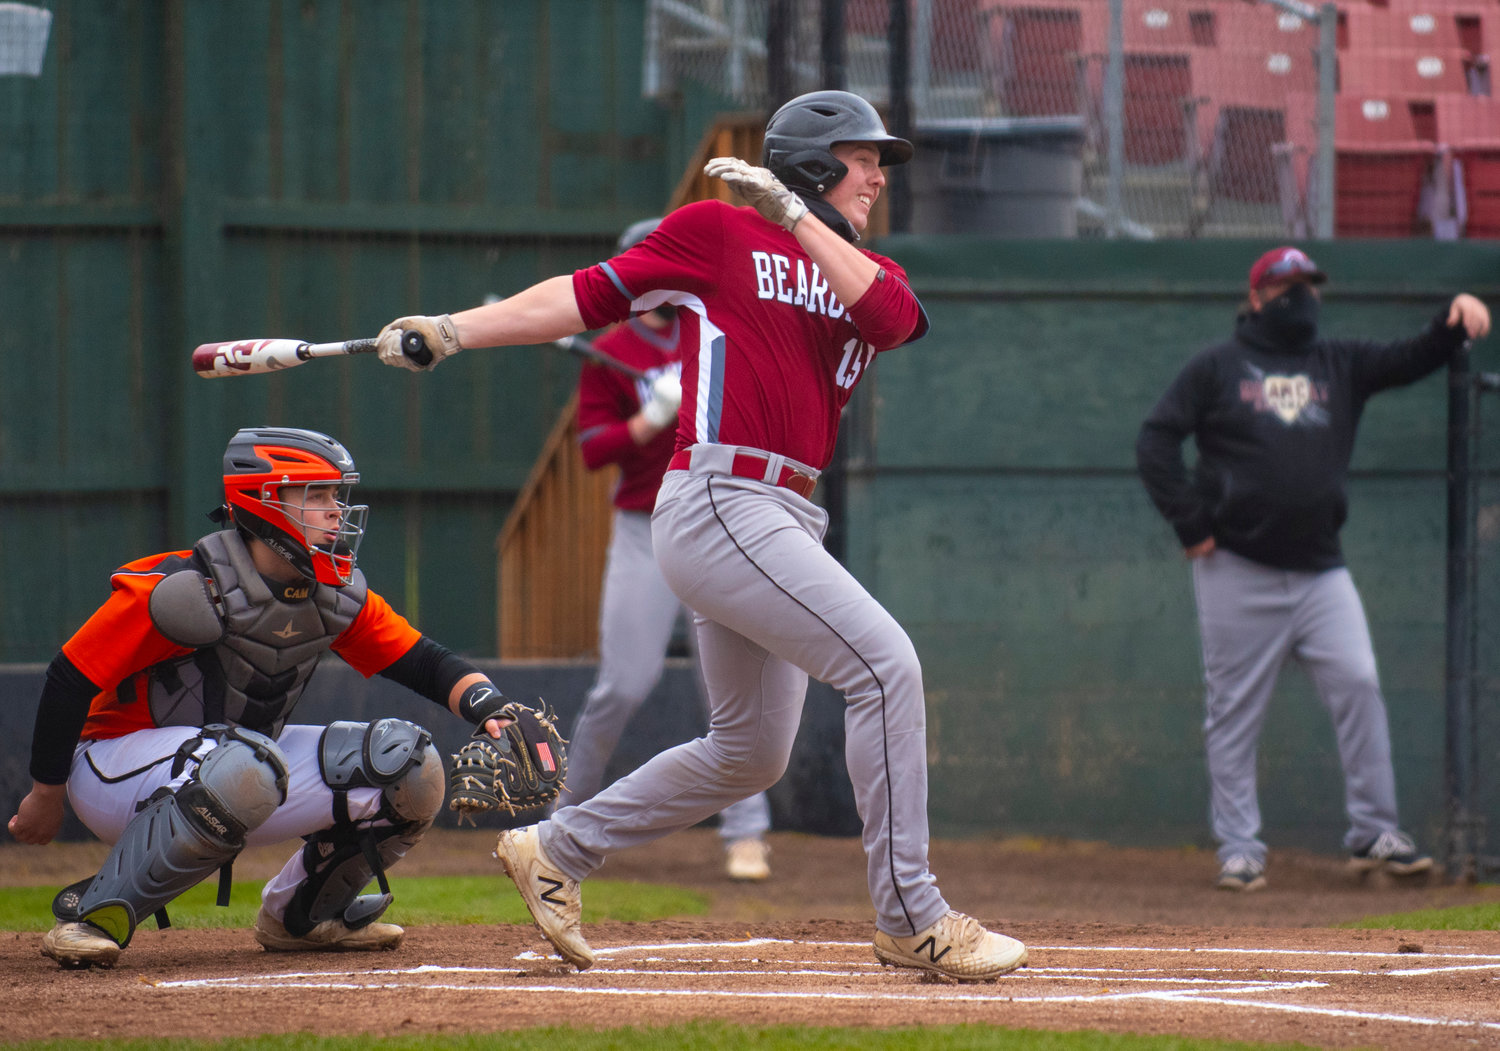 W.F. West catcher Drew Reynolds (15) sends a pitch to the outfield on Friday.